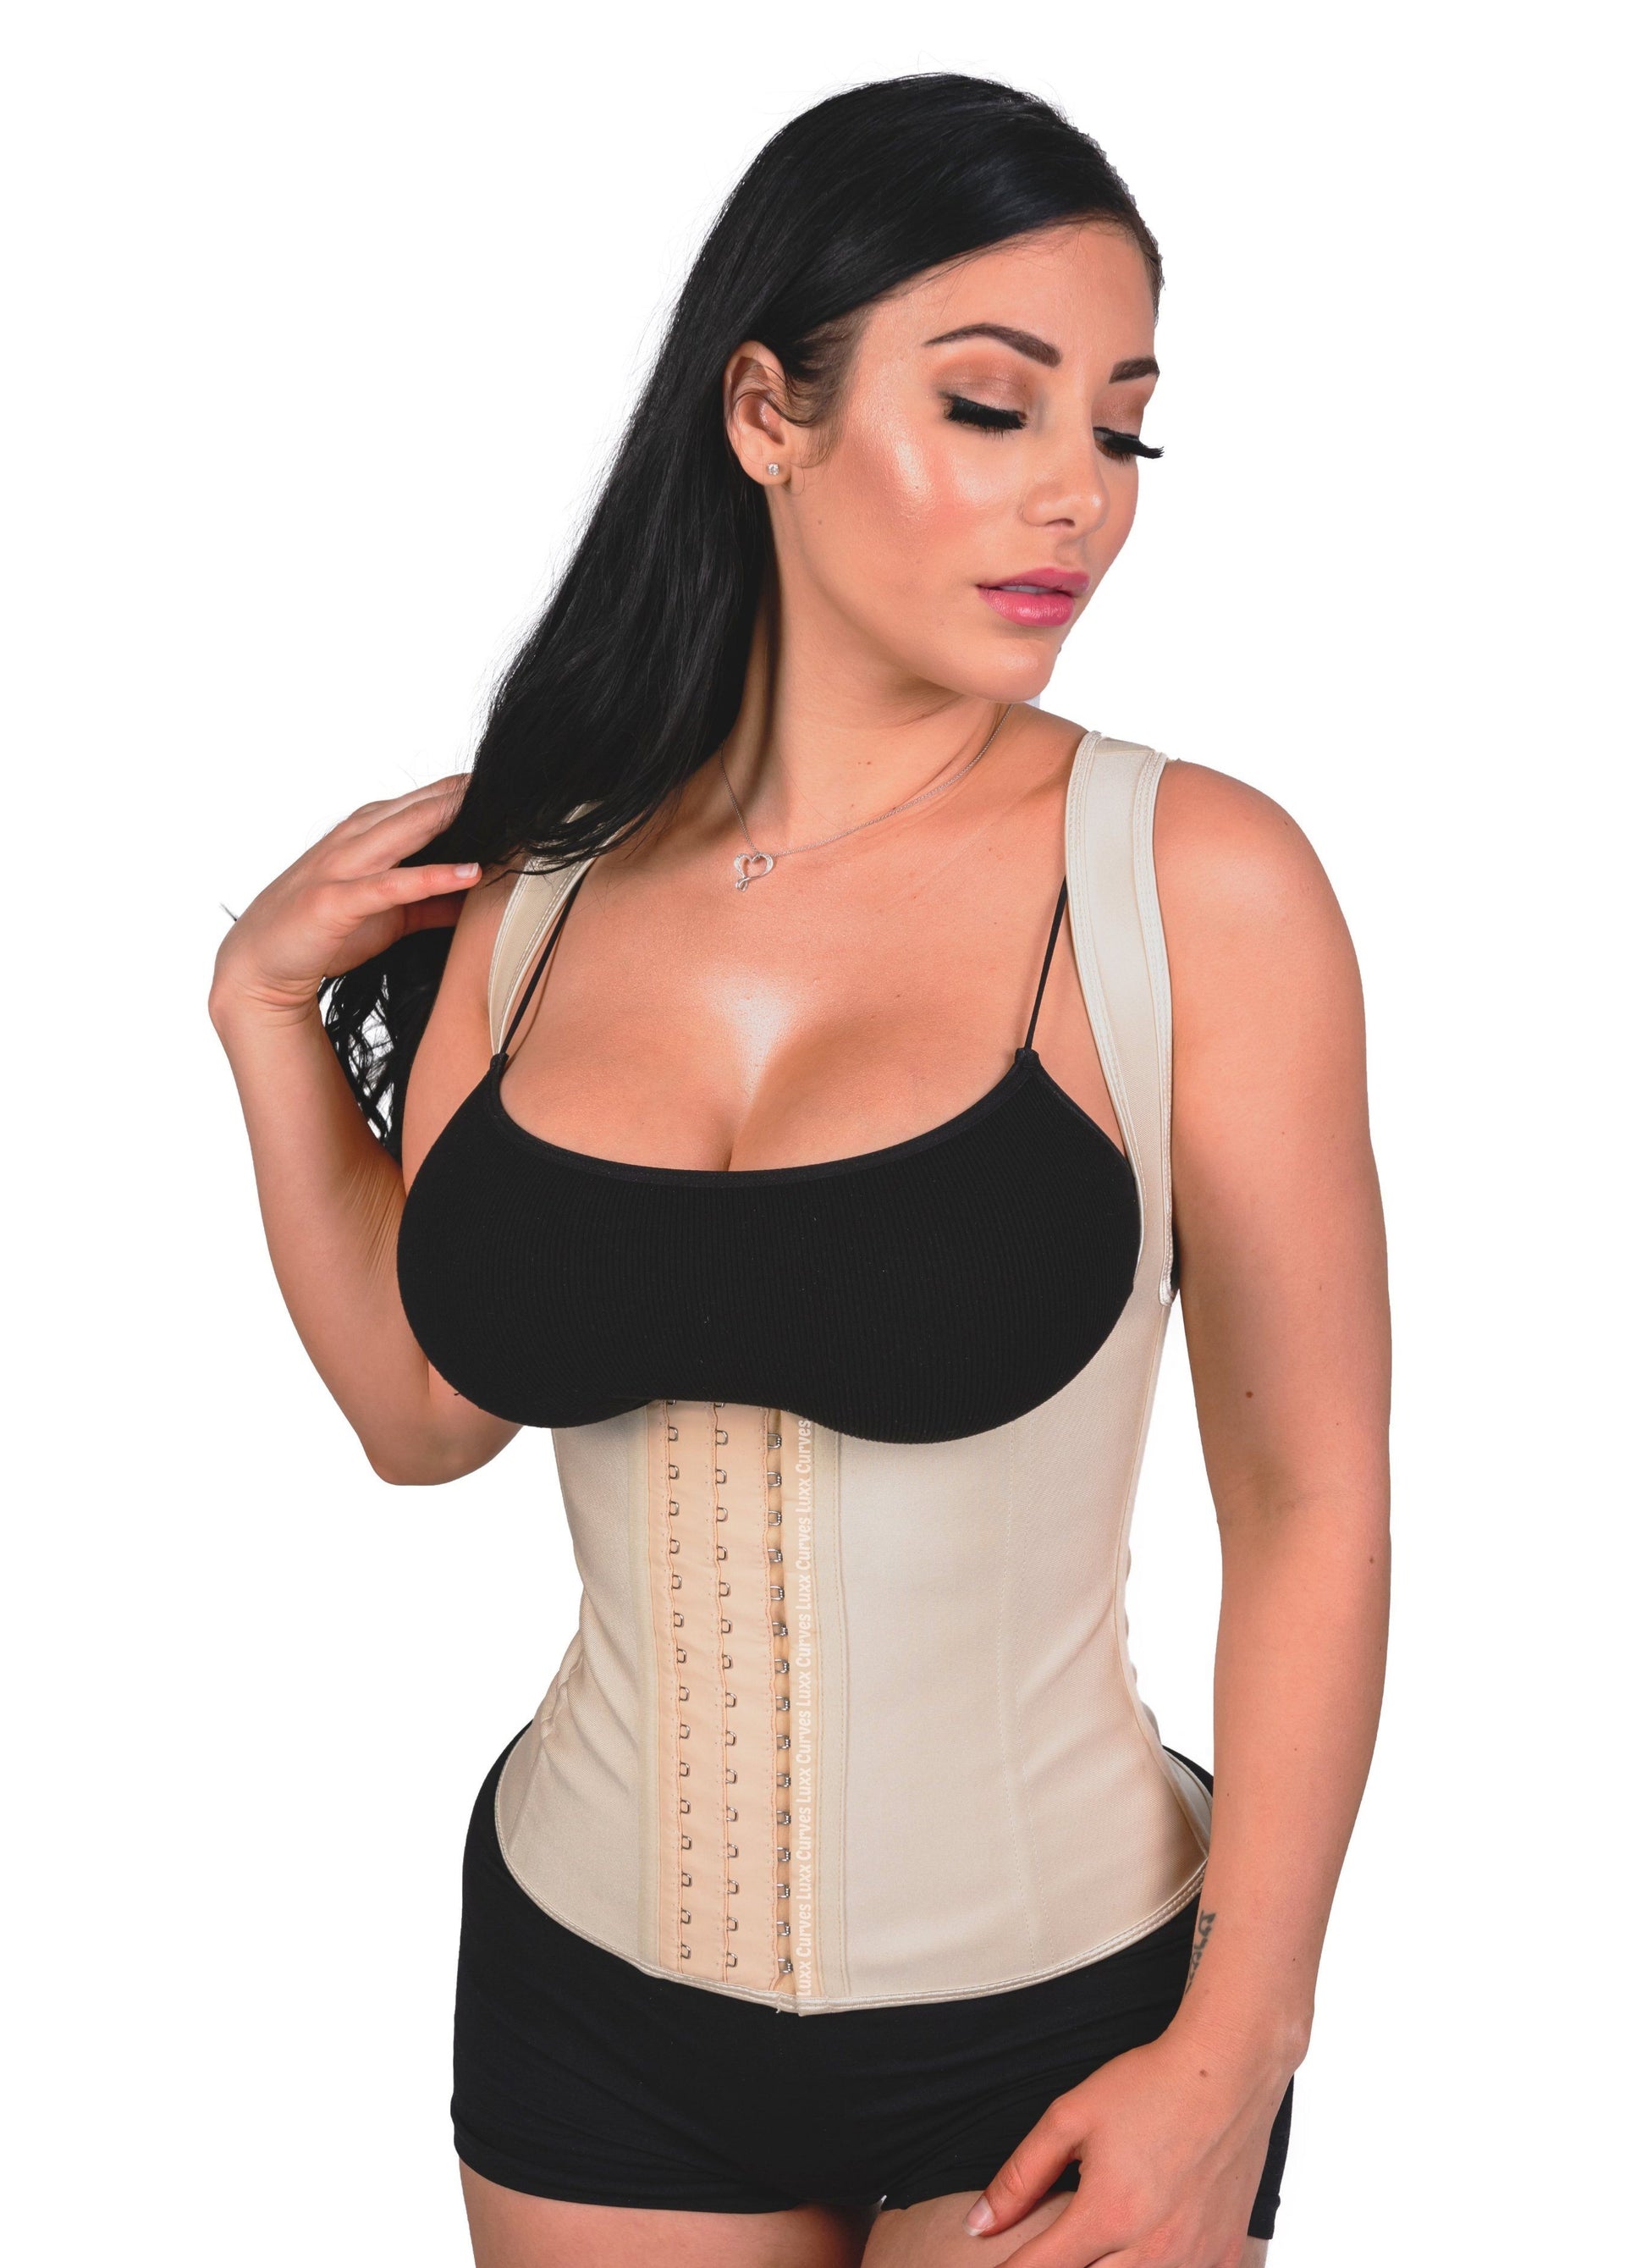 Waist Trainers for sale in Cape Town, Western Cape